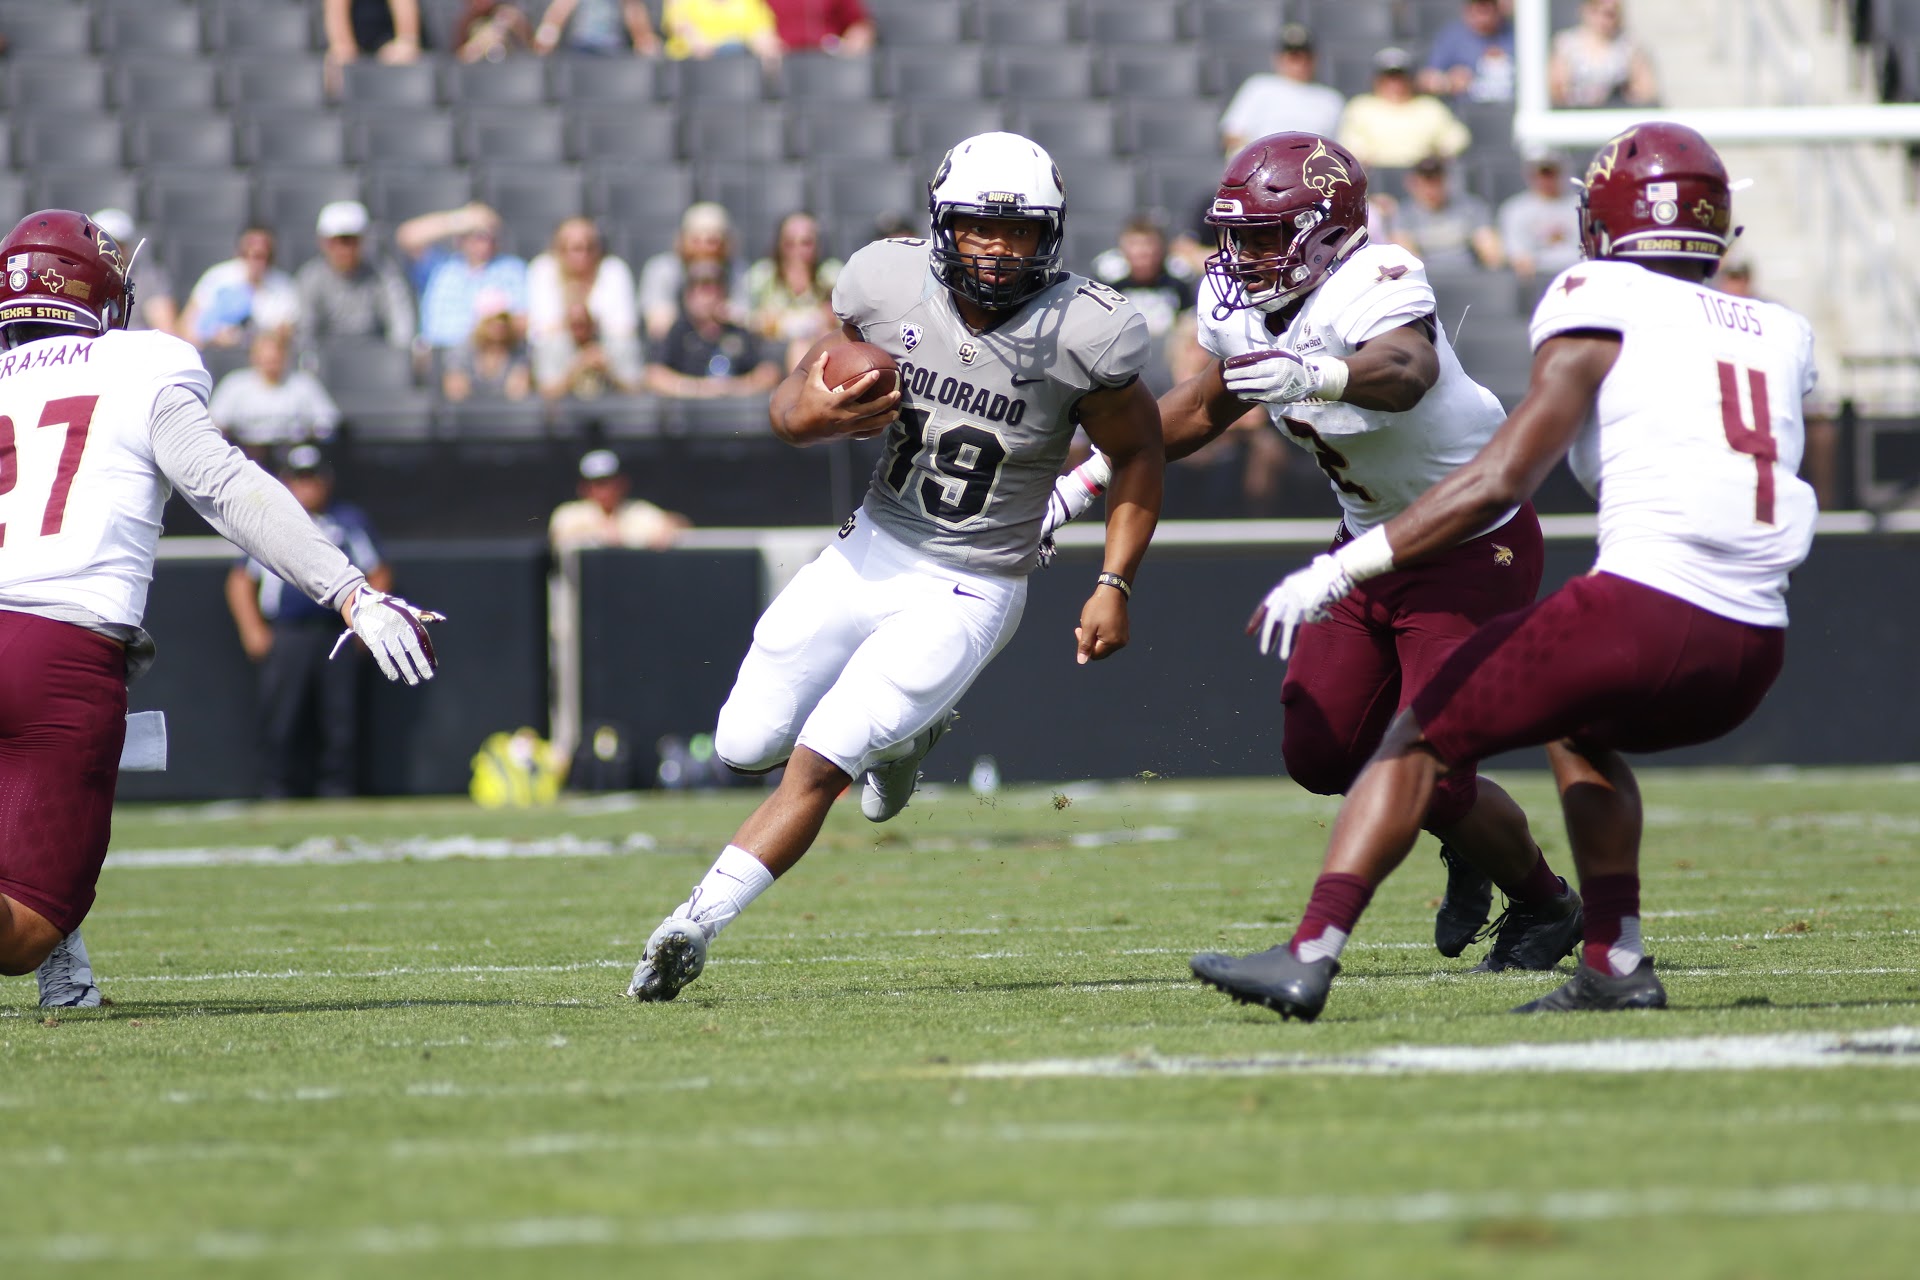 Colorado defeats Texas State 37-3, despite offensive miscues